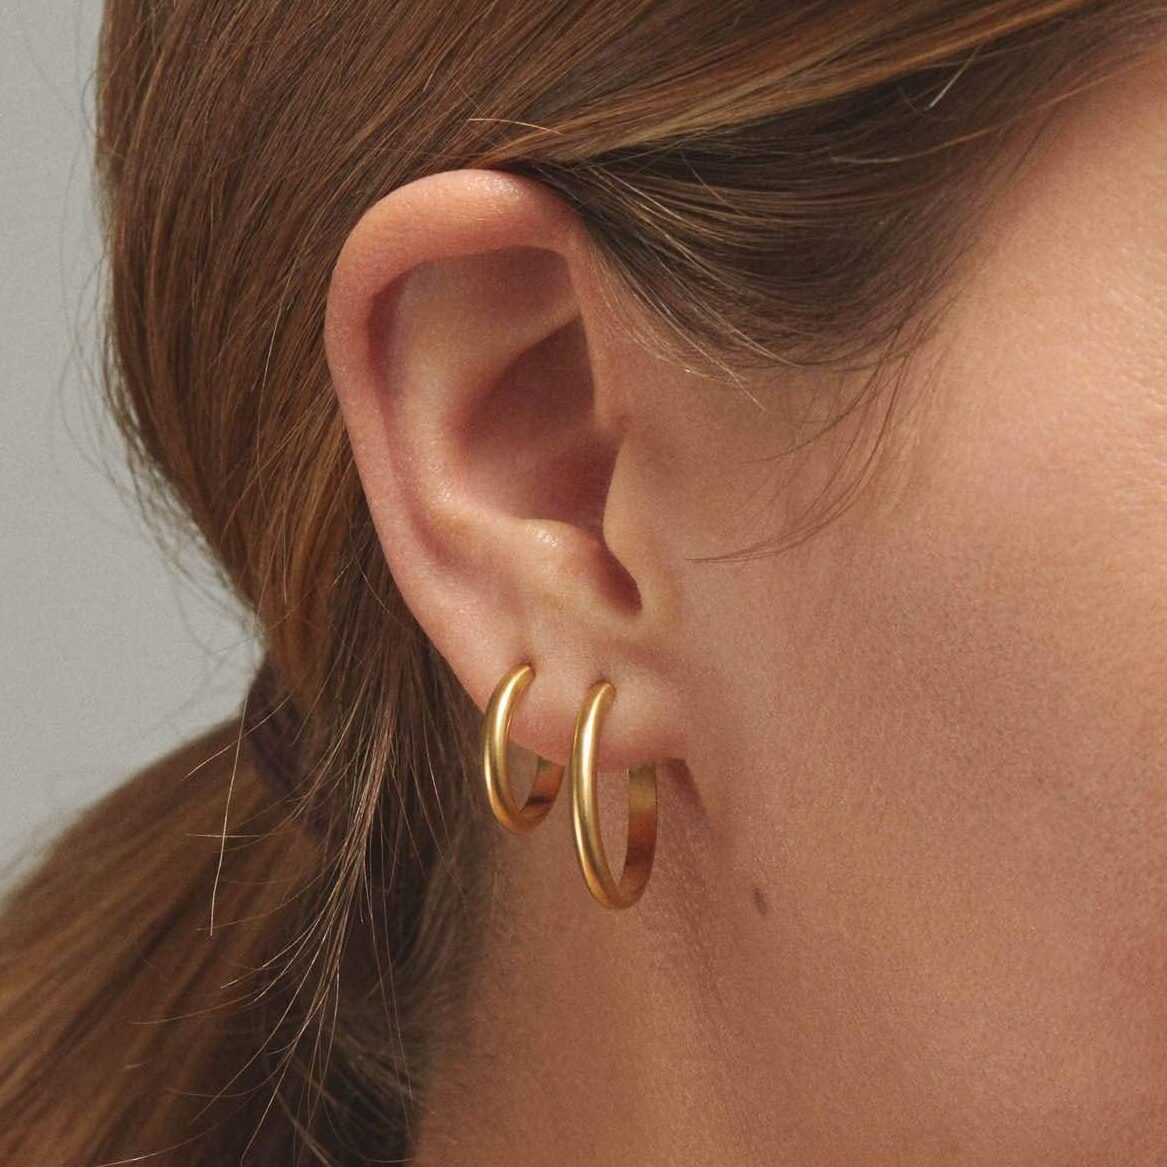 GLDN HOOP EARRINGS MOTHERS DAY GIFTS